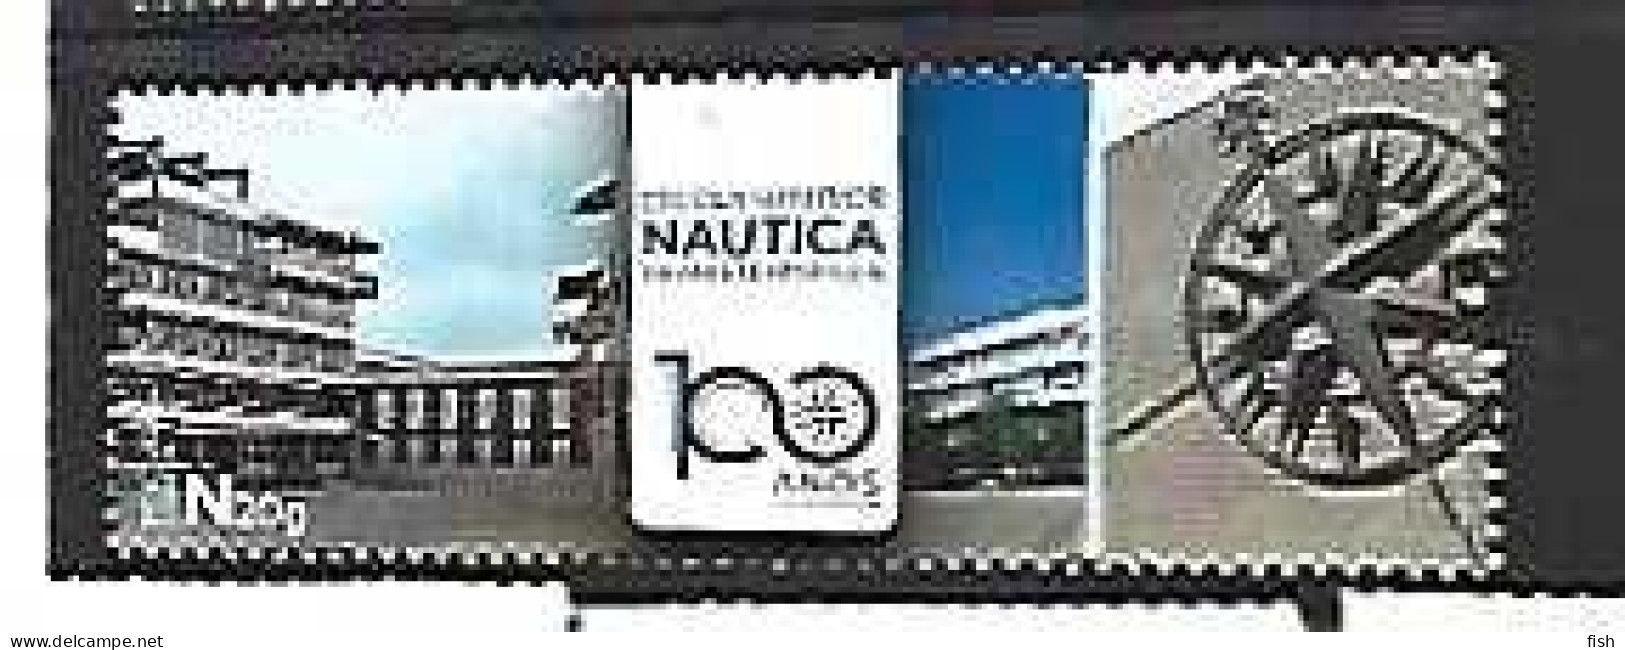 Portugal ** & 100 Years Infante D. Henrique Nautical School 1924-2024 (988999) - Other (Sea)